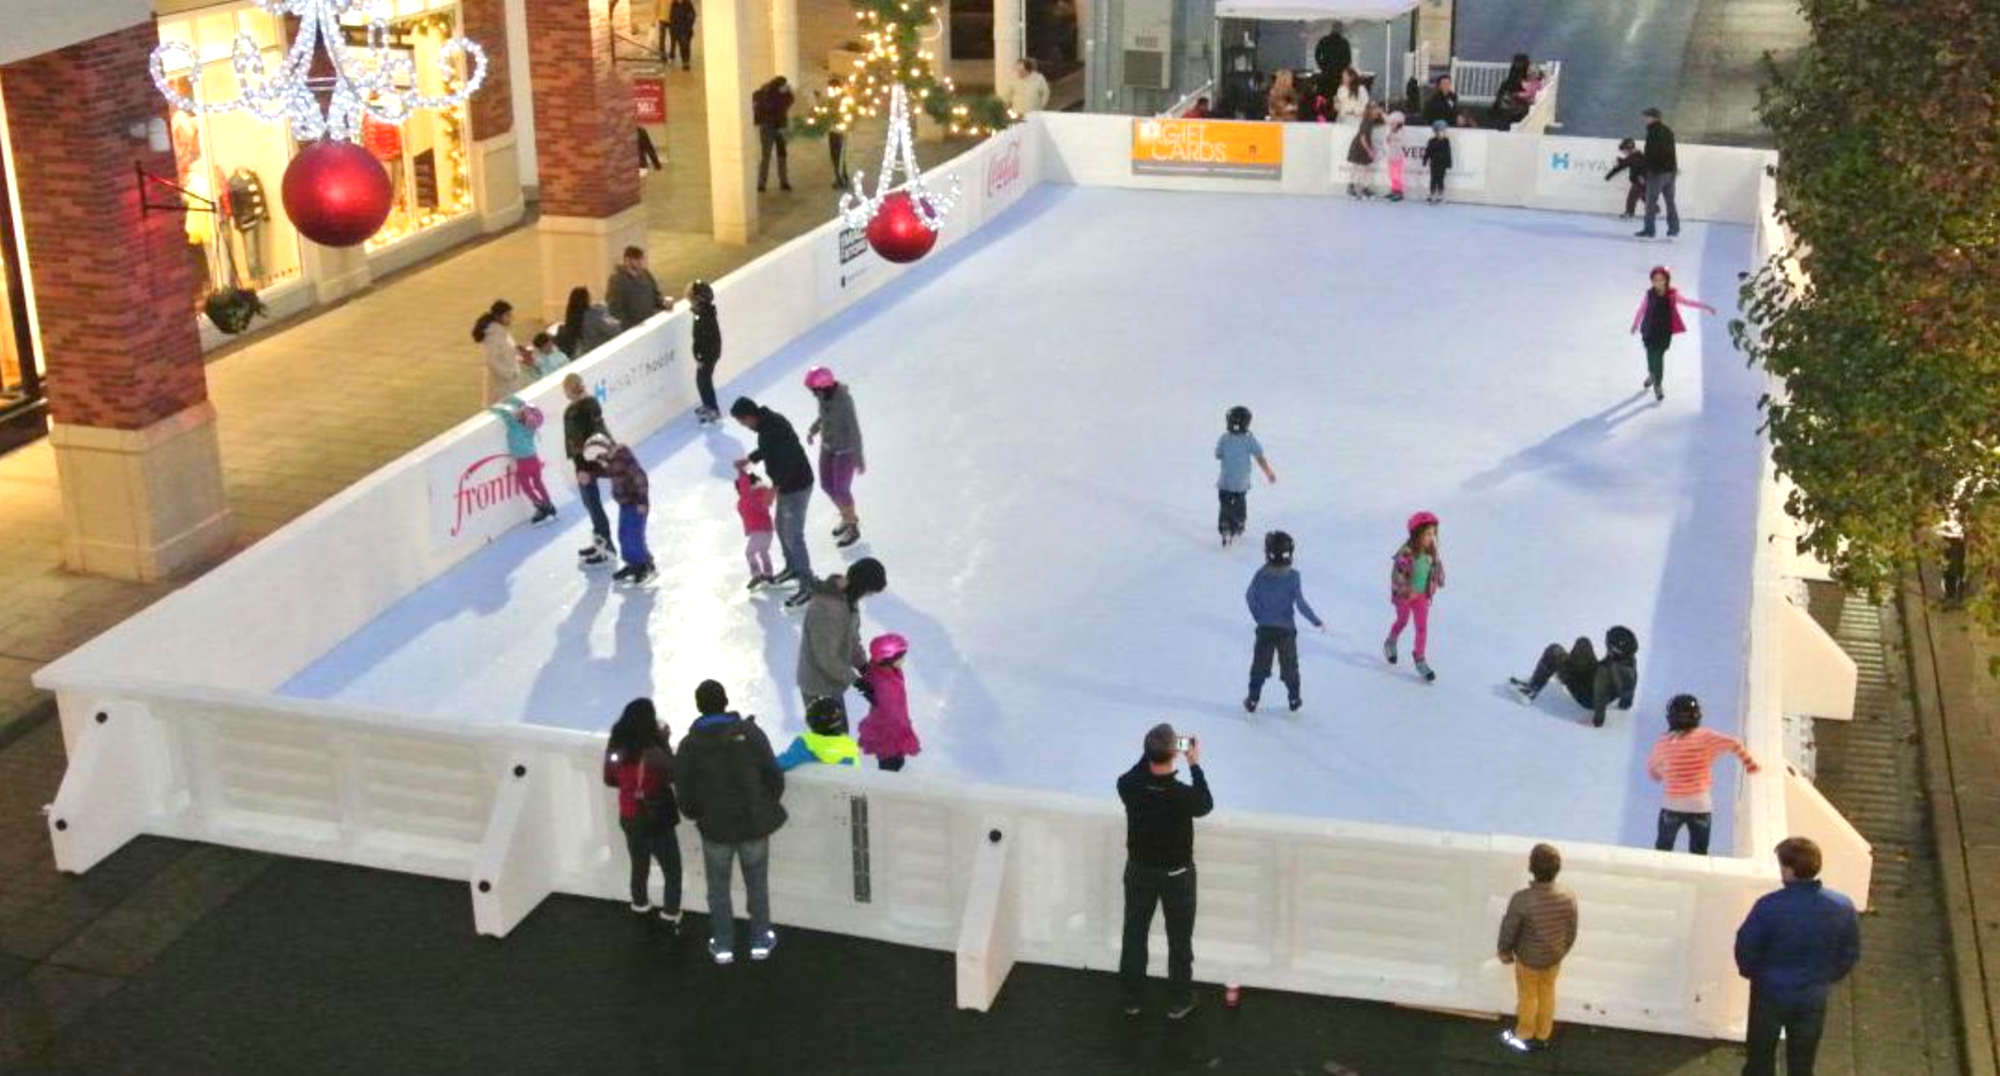 Among the attractions of the proposed winter festival at St. Armands Circle is a synthetic ice skating rink. (Courtesy image)